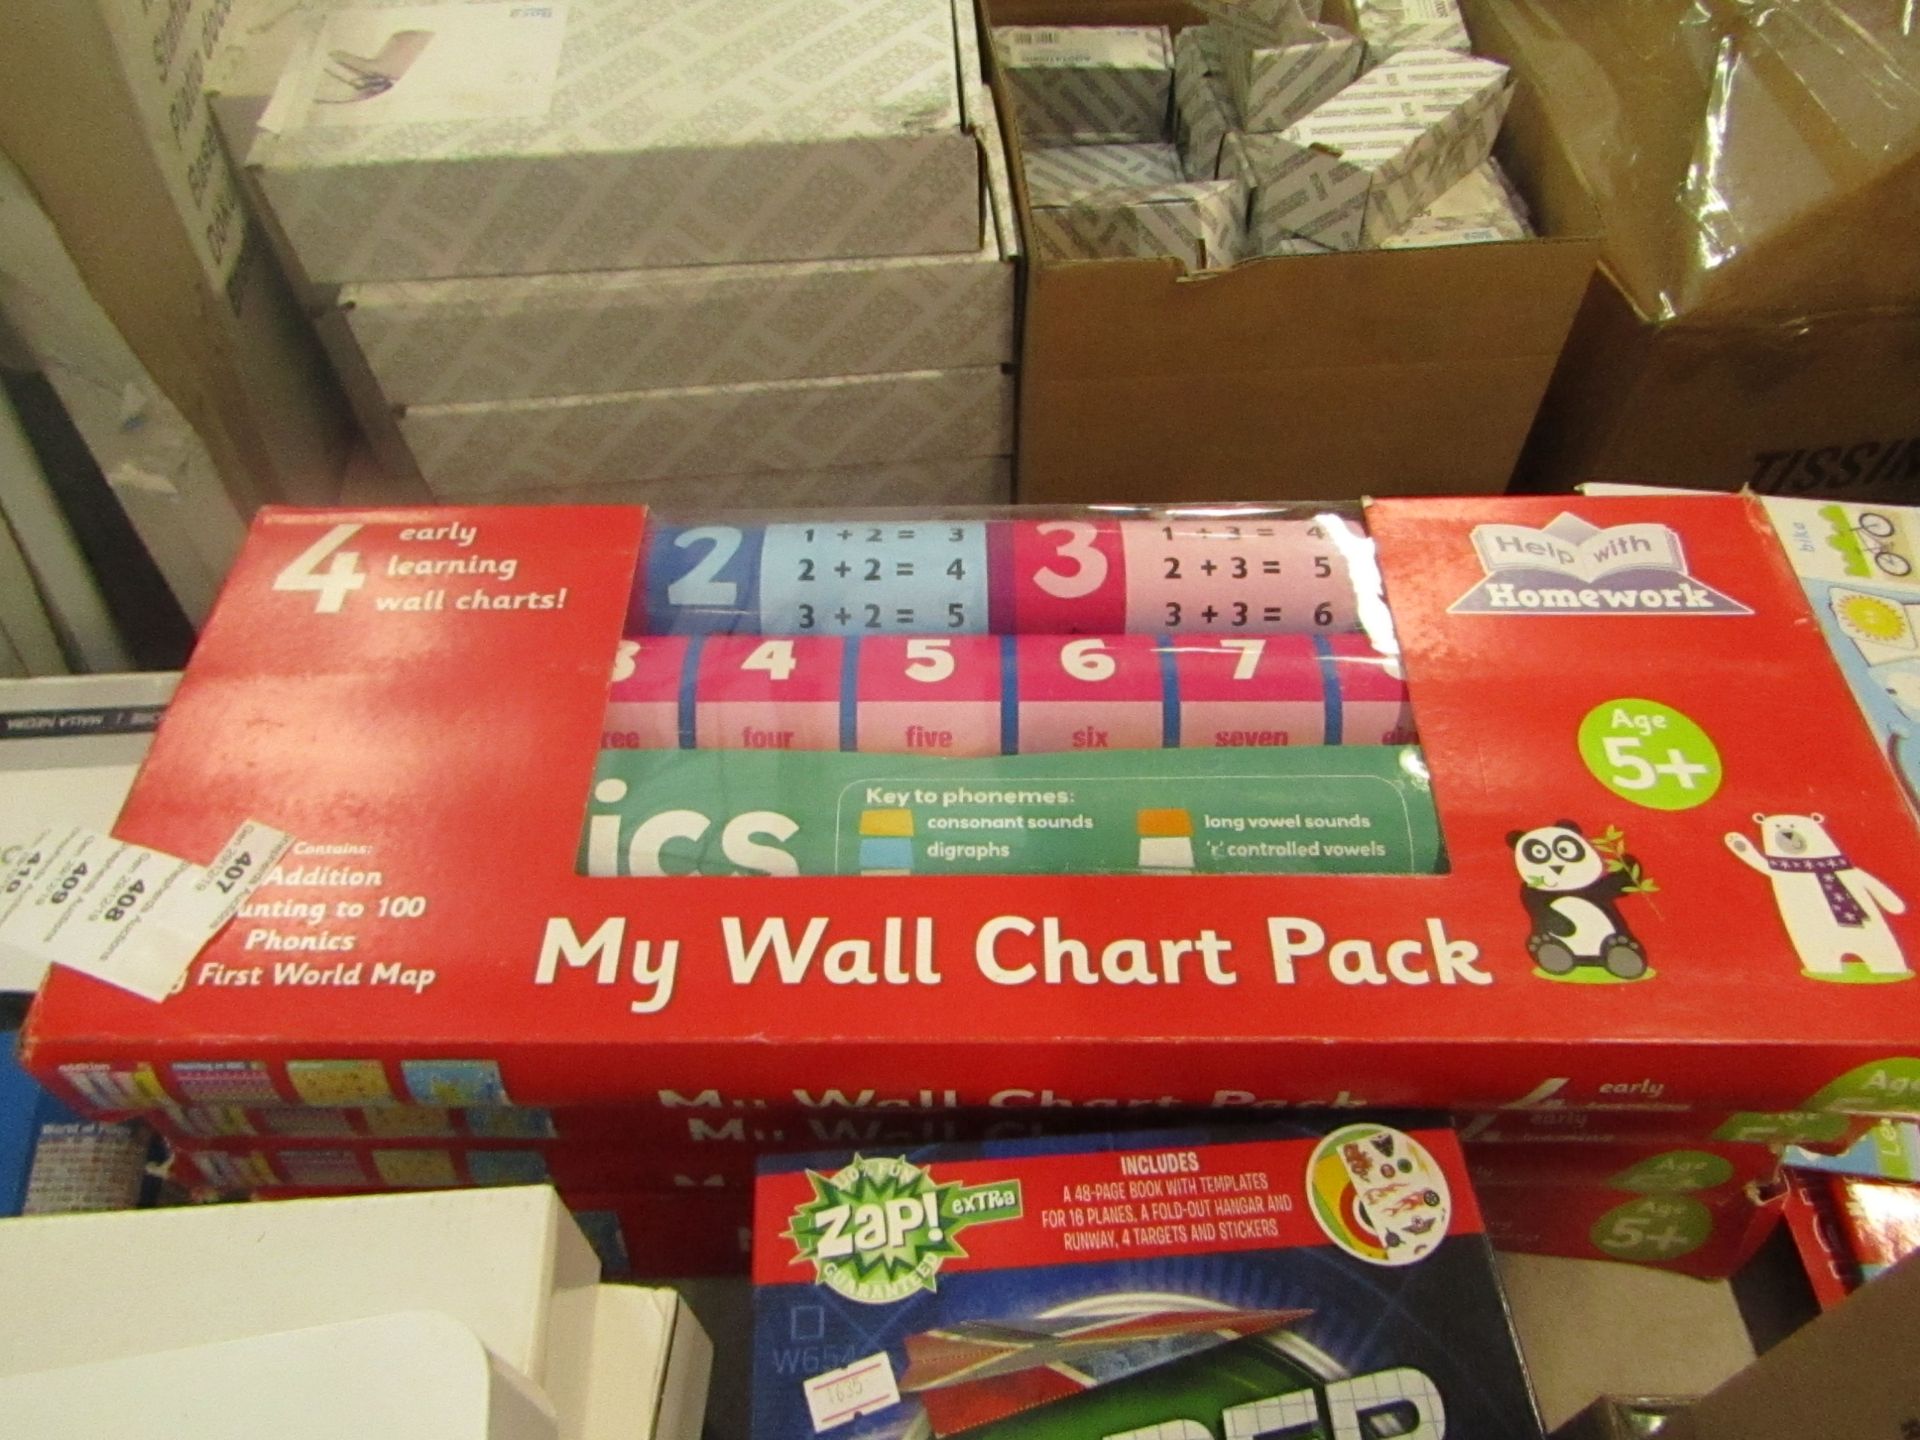 Help with Homework "My Wall Charts" 5+ new & packaged (packaging not perfect)